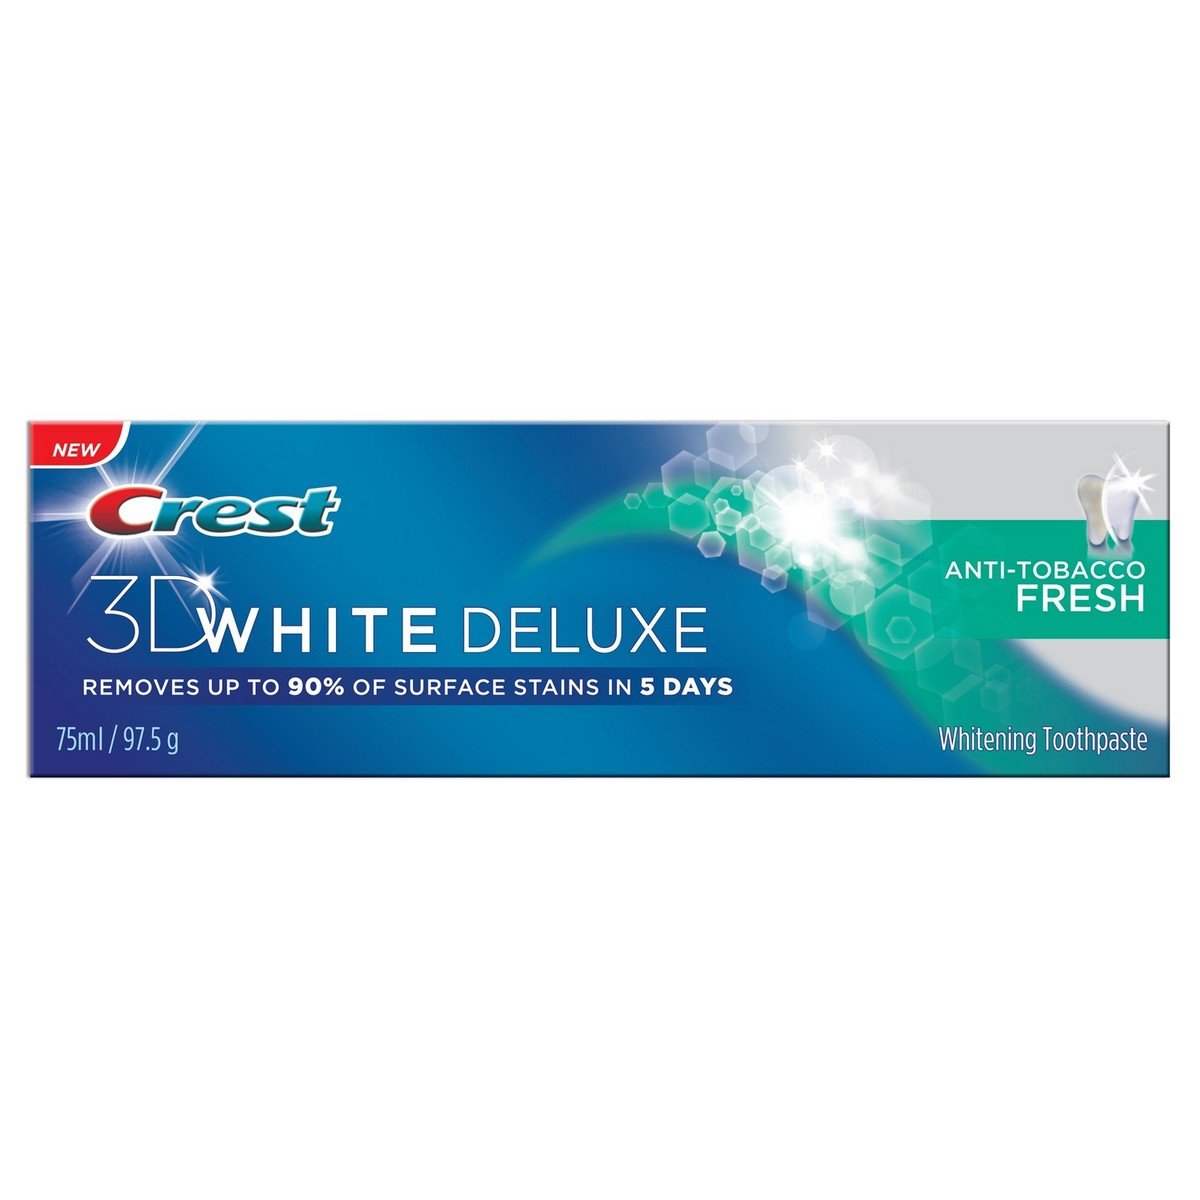 Buy Crest 3D White Deluxe Anti-Tobacco Fresh Whitening Toothpaste 75ml Online at Best Price | Tooth Paste | Lulu KSA in UAE